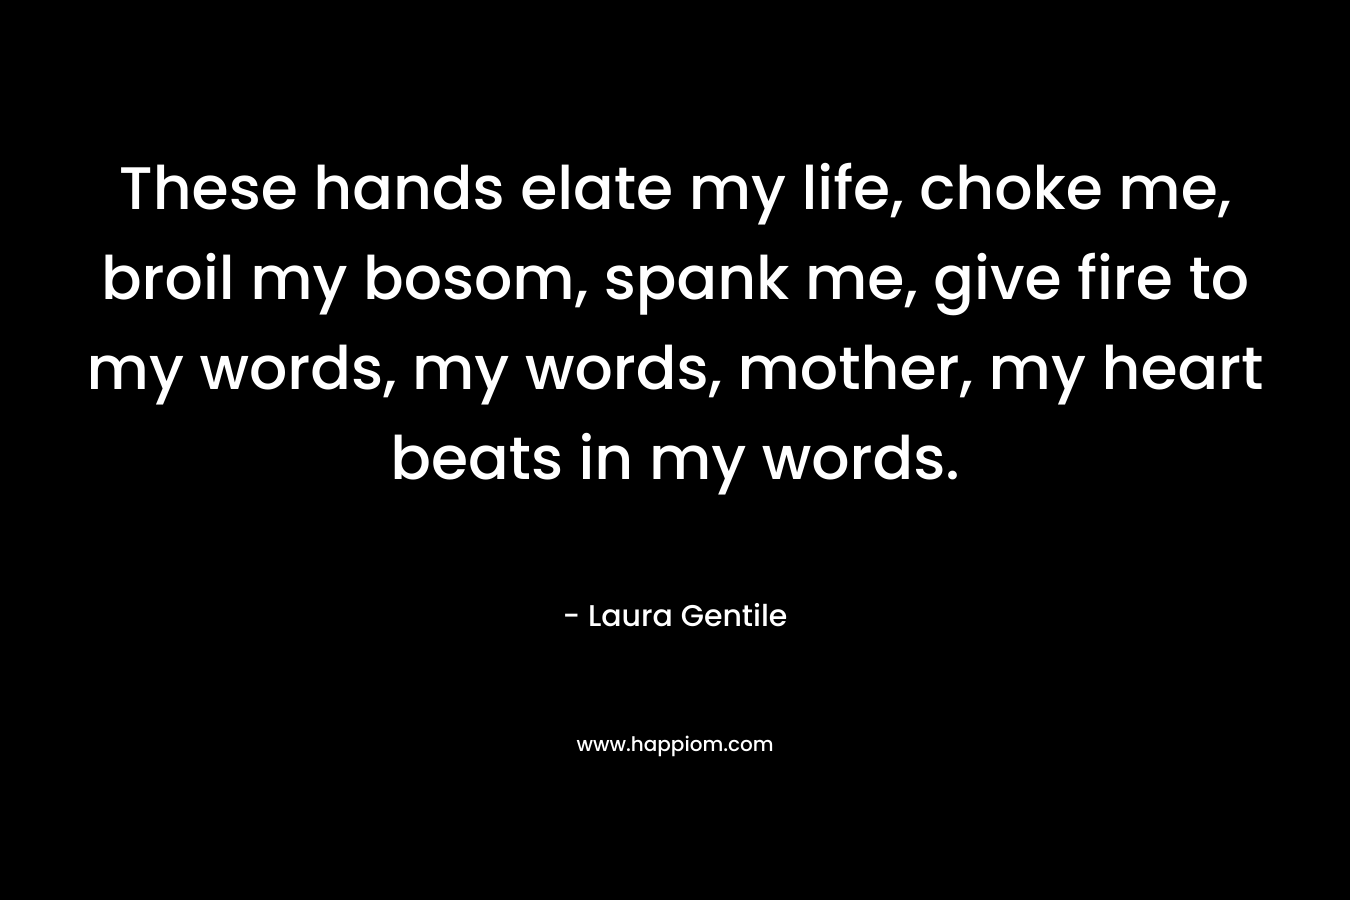 These hands elate my life, choke me, broil my bosom, spank me, give fire to my words, my words, mother, my heart beats in my words. – Laura Gentile